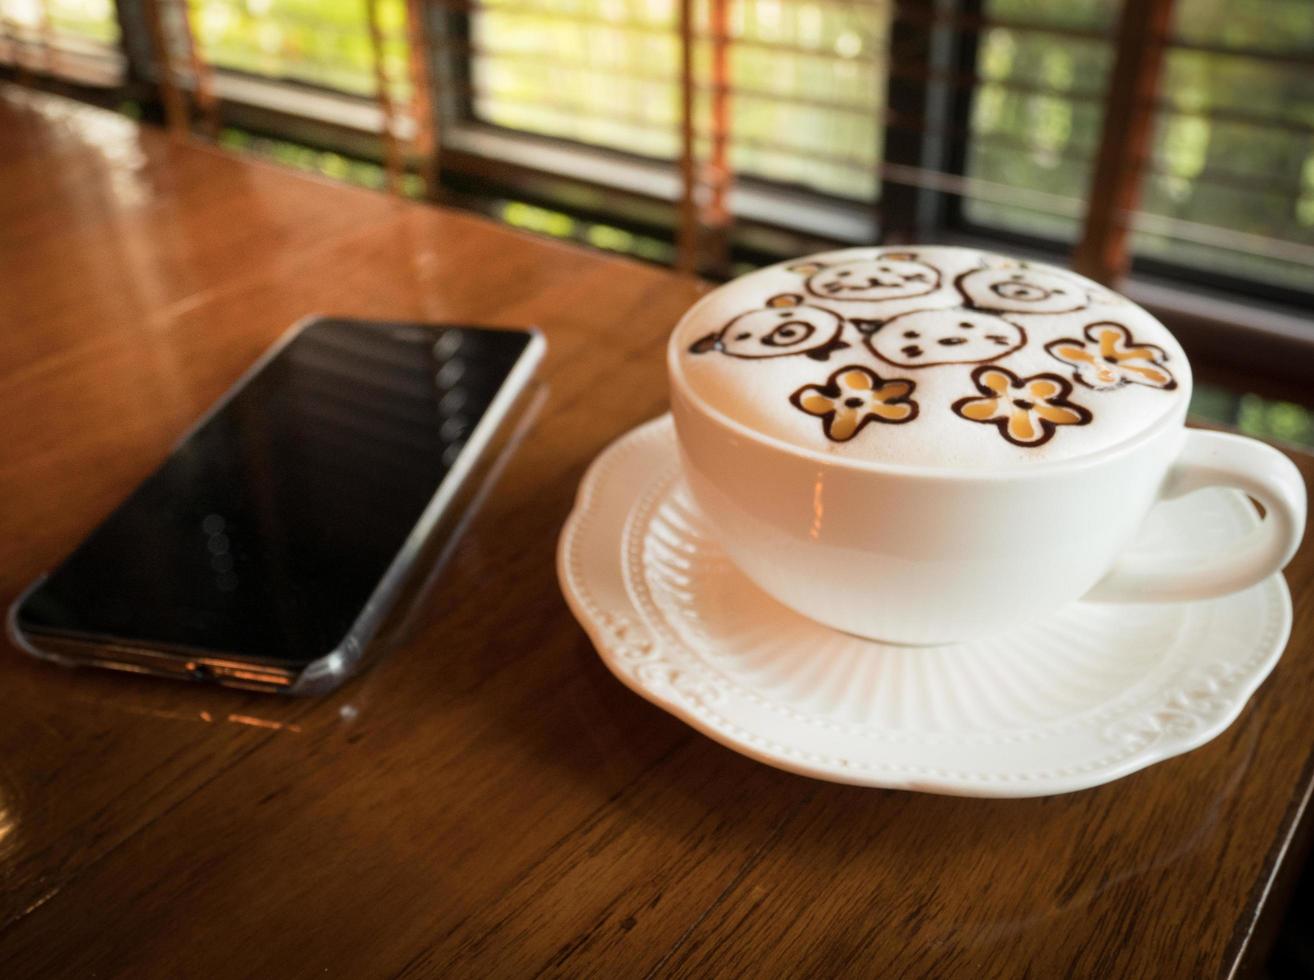 Coffee Latte Art with mobile phone with blank screen For advertising, enter a message or promotion topic at the coffee shop. photo